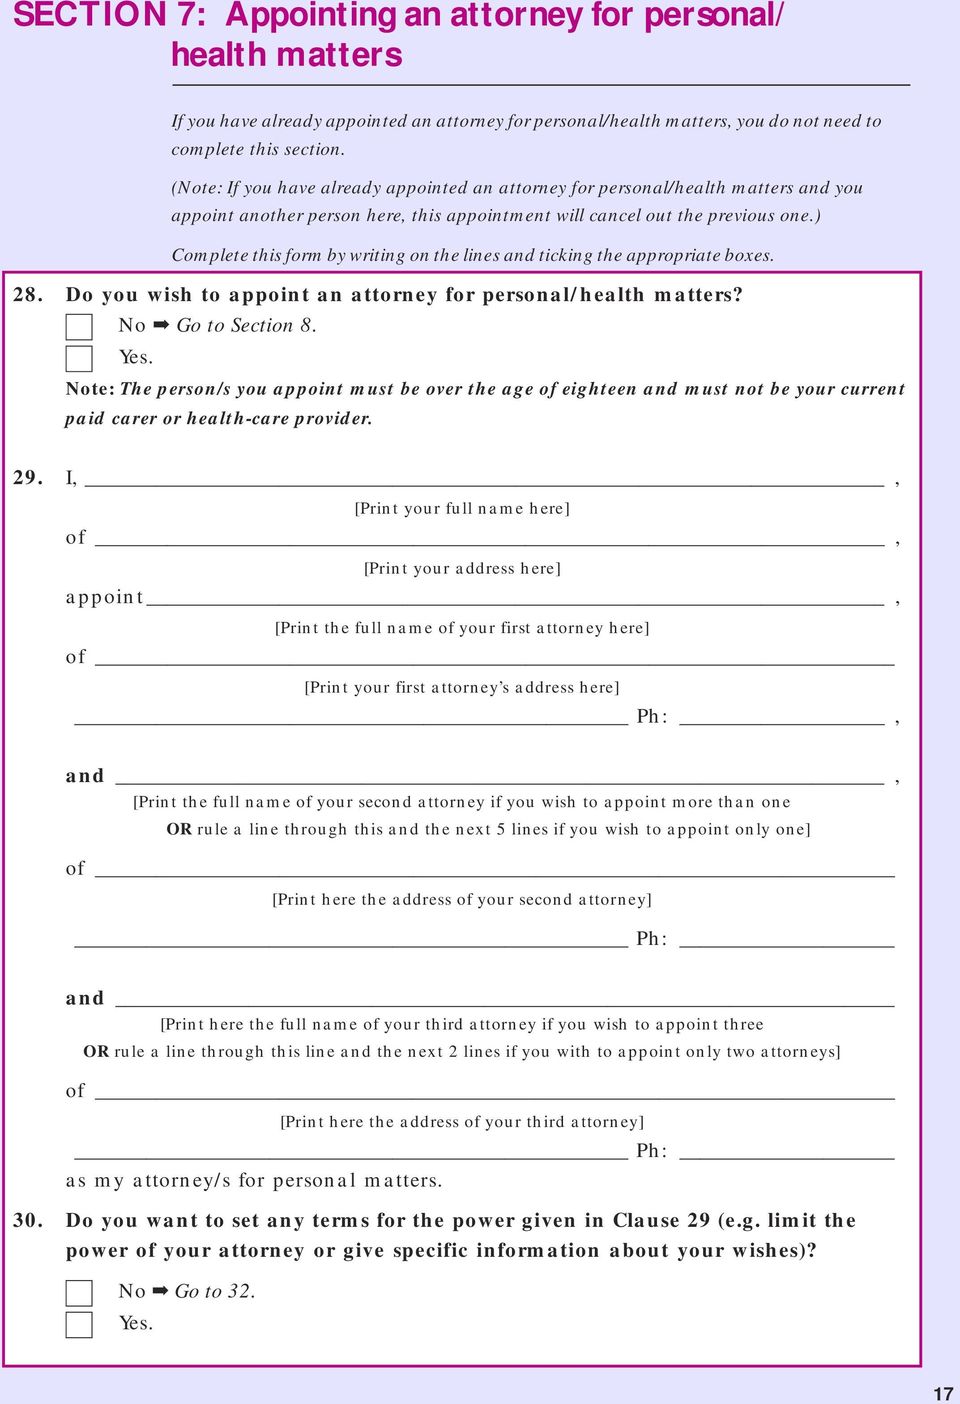 ) Complete this form by writing on the lines and ticking the appropriate boxes. 28. Do you wish to appoint an attorney for personal/health matters? No Go to Section 8. Yes.